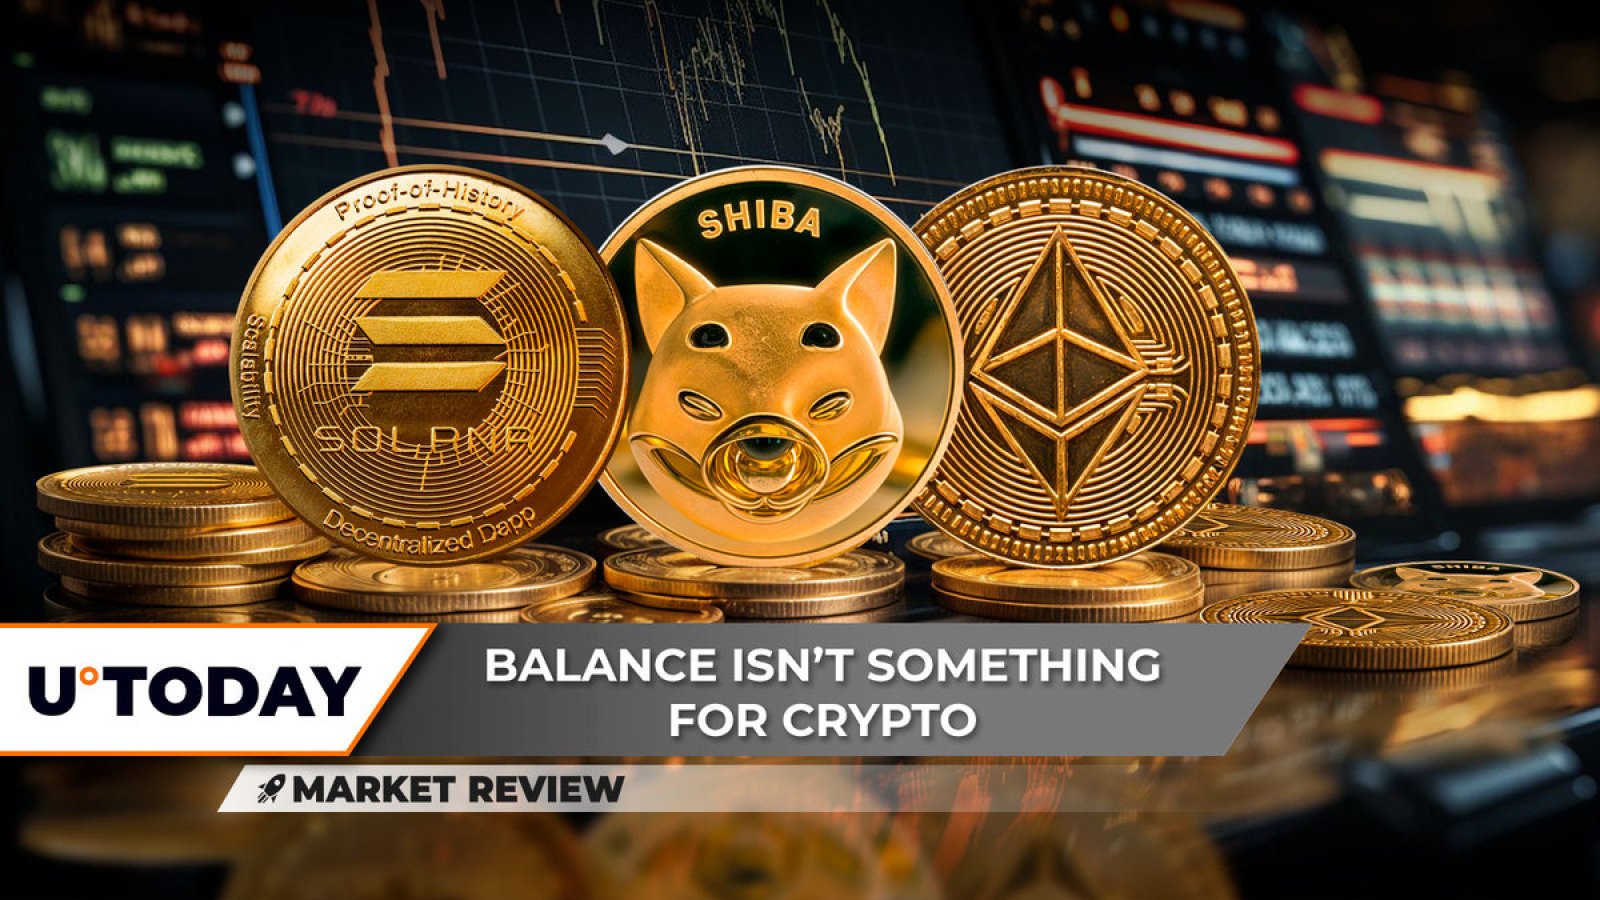 Shiba Inu (SHIB) on Its Way to Reversal, Solana (SOL) Hanging From Edge, Ethereum (ETH ) Lost $3,500